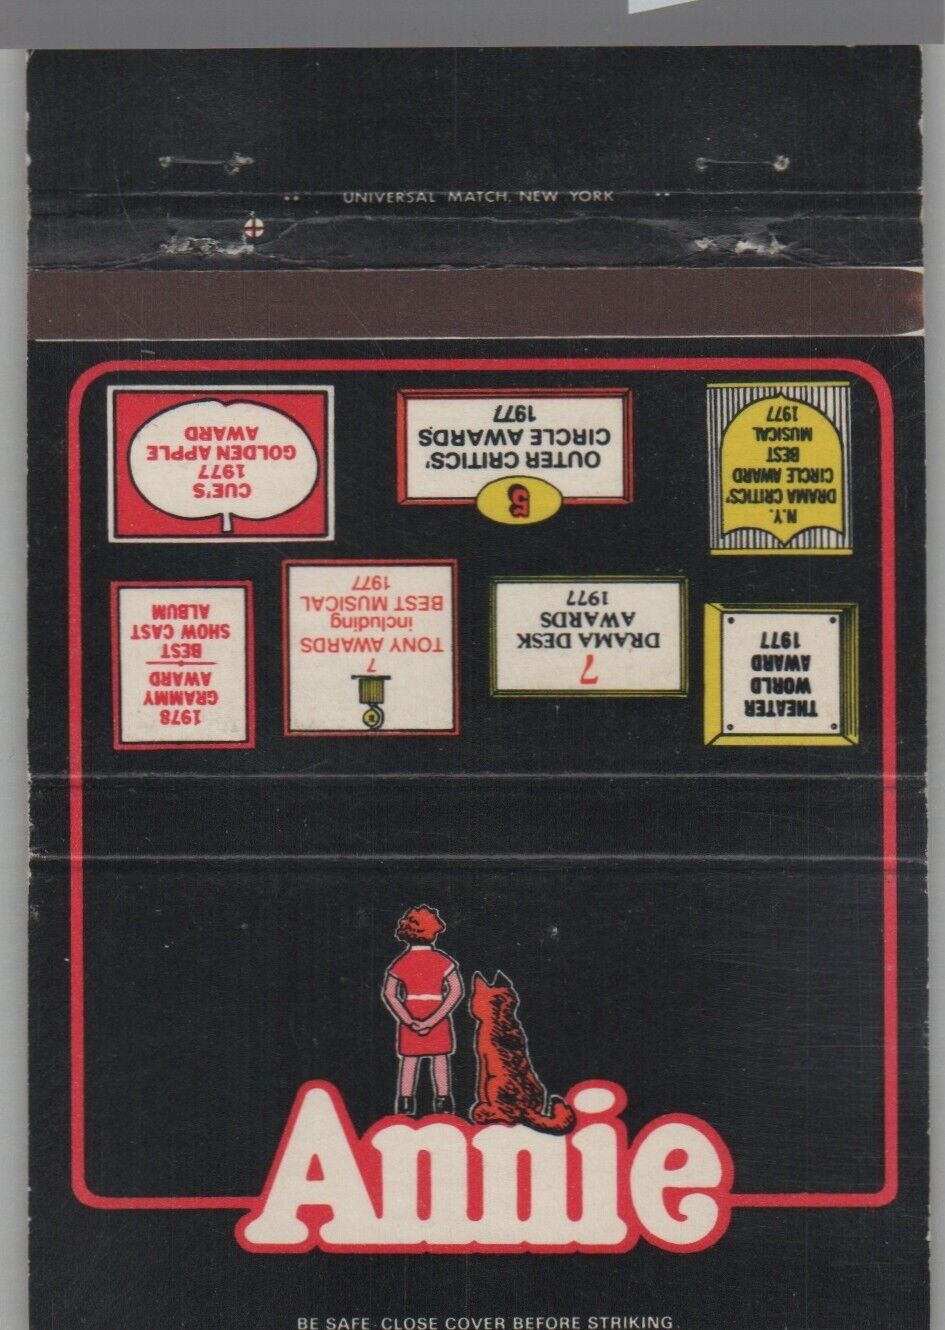 40 Strike Matchbook Cover - Annie Theatrical Production